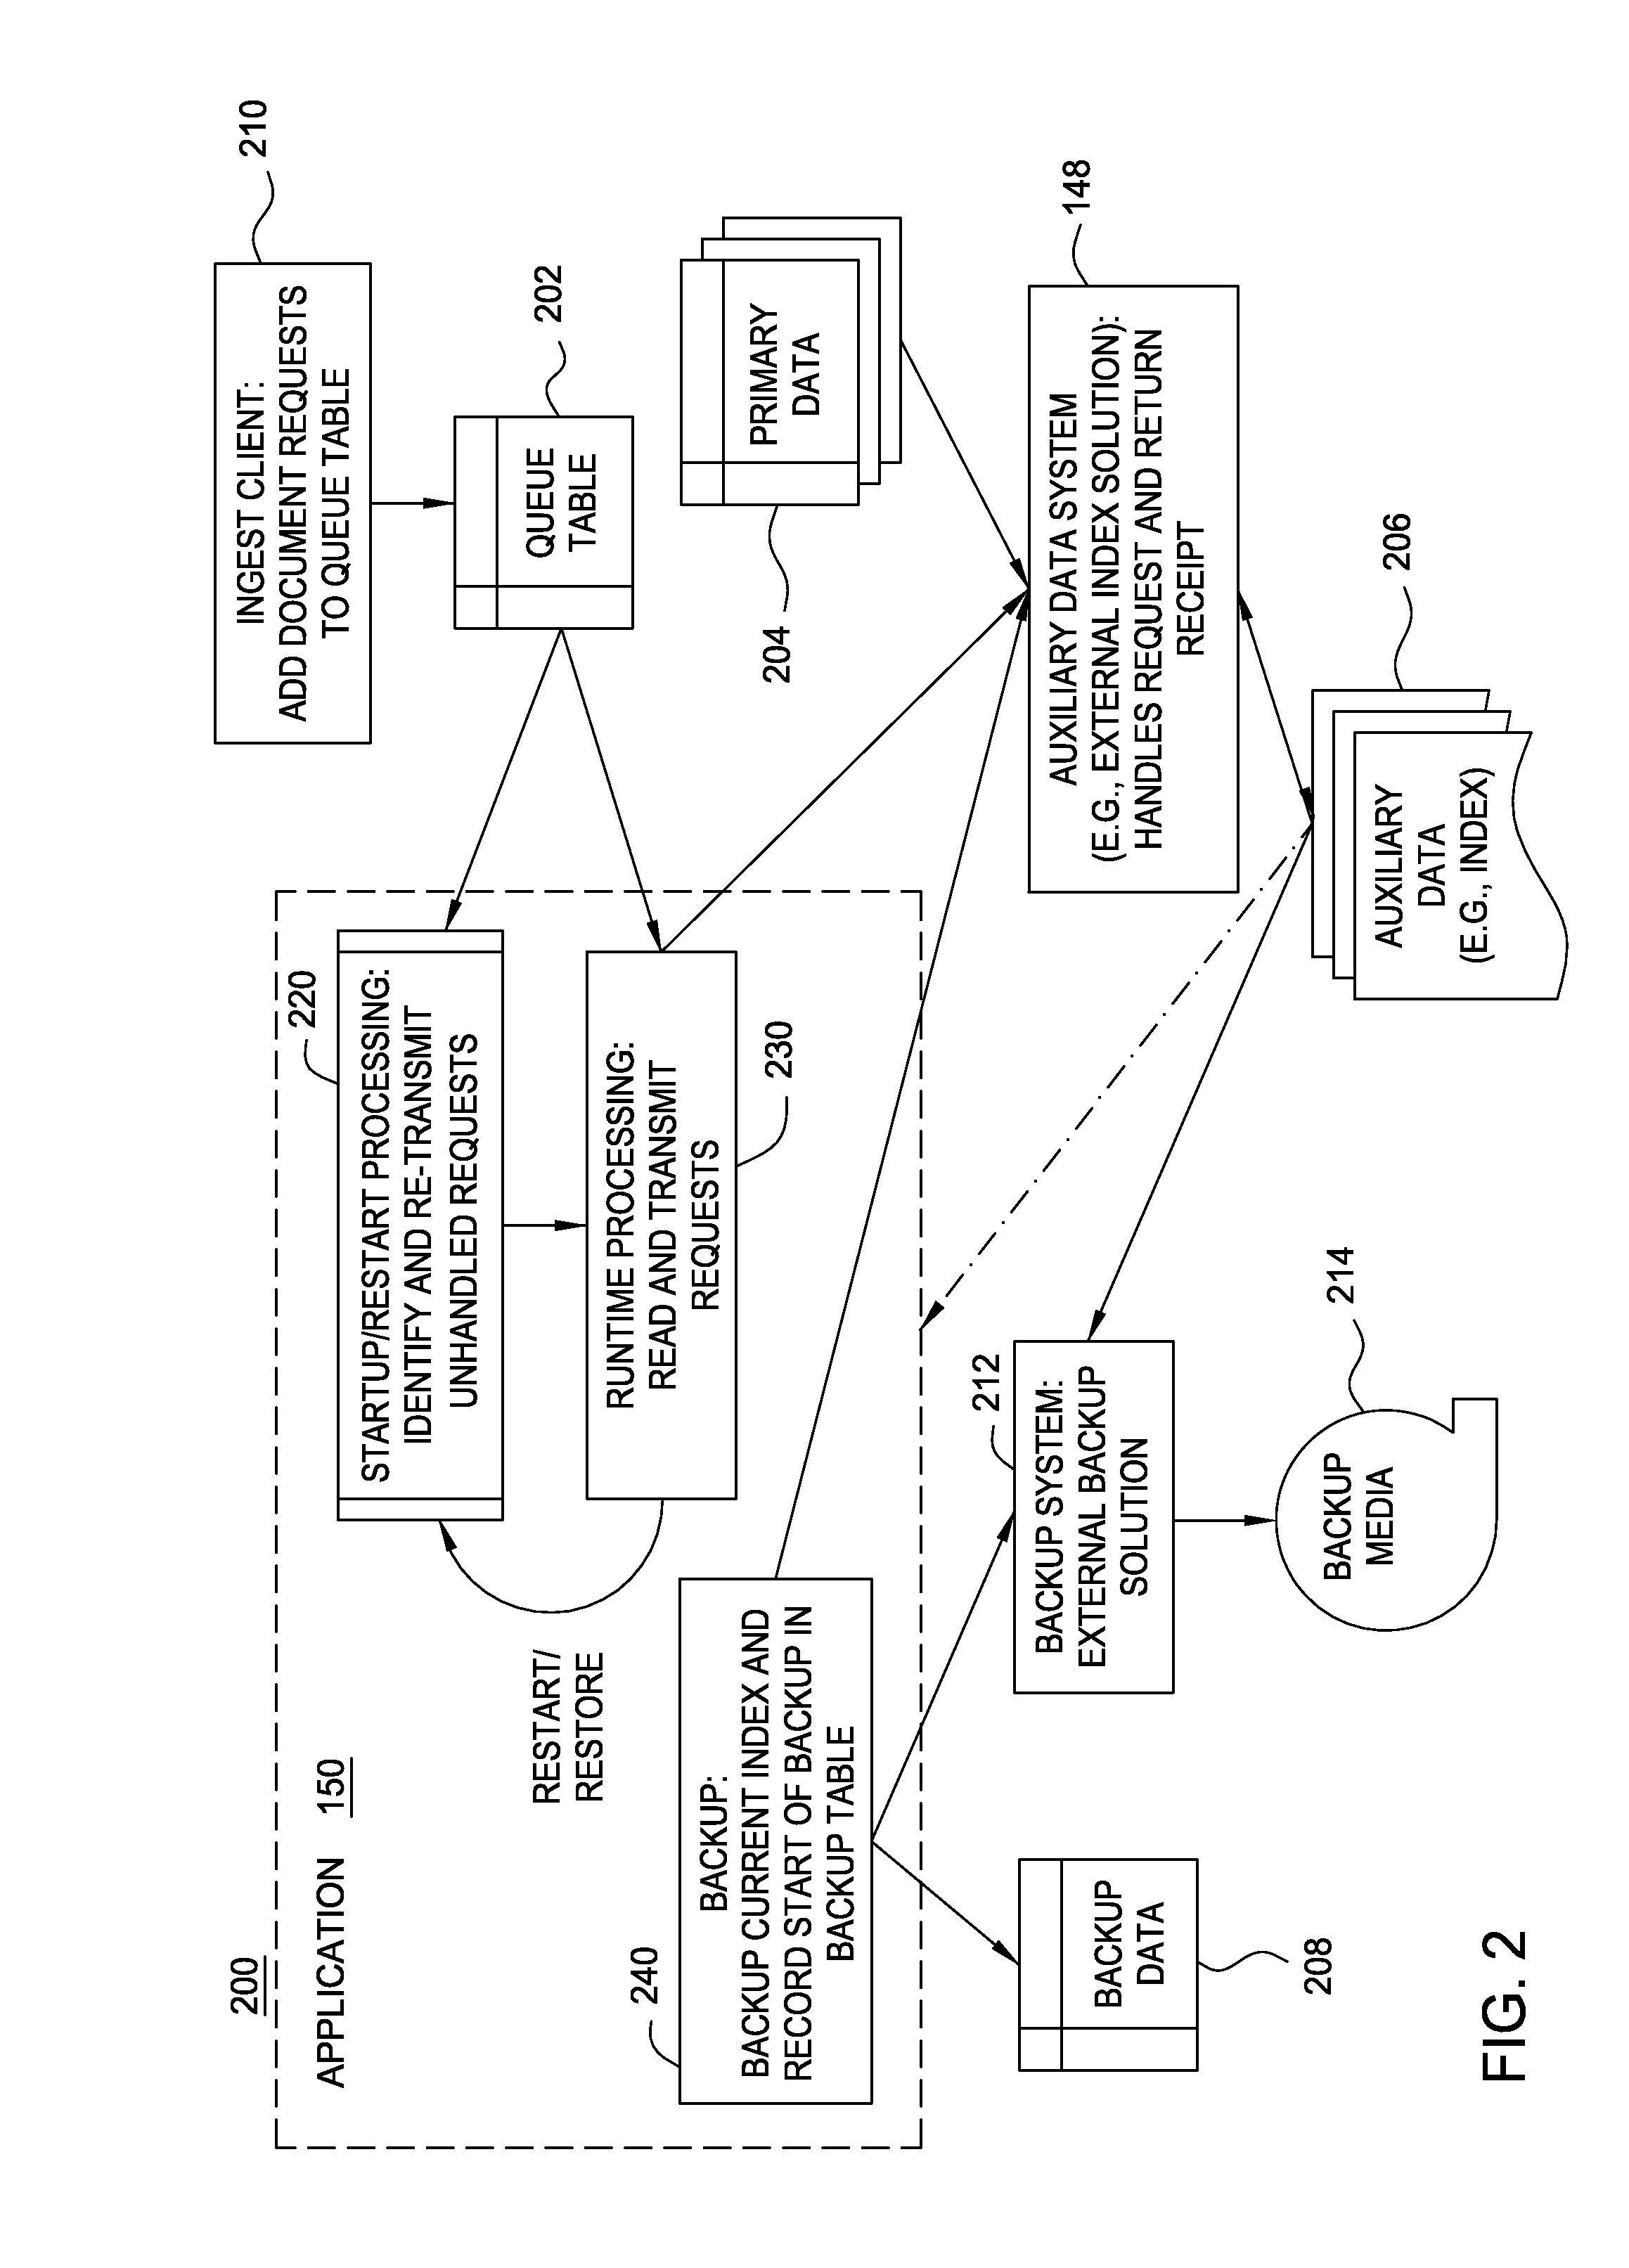 Synchronizing an auxiliary data system with a primary data system